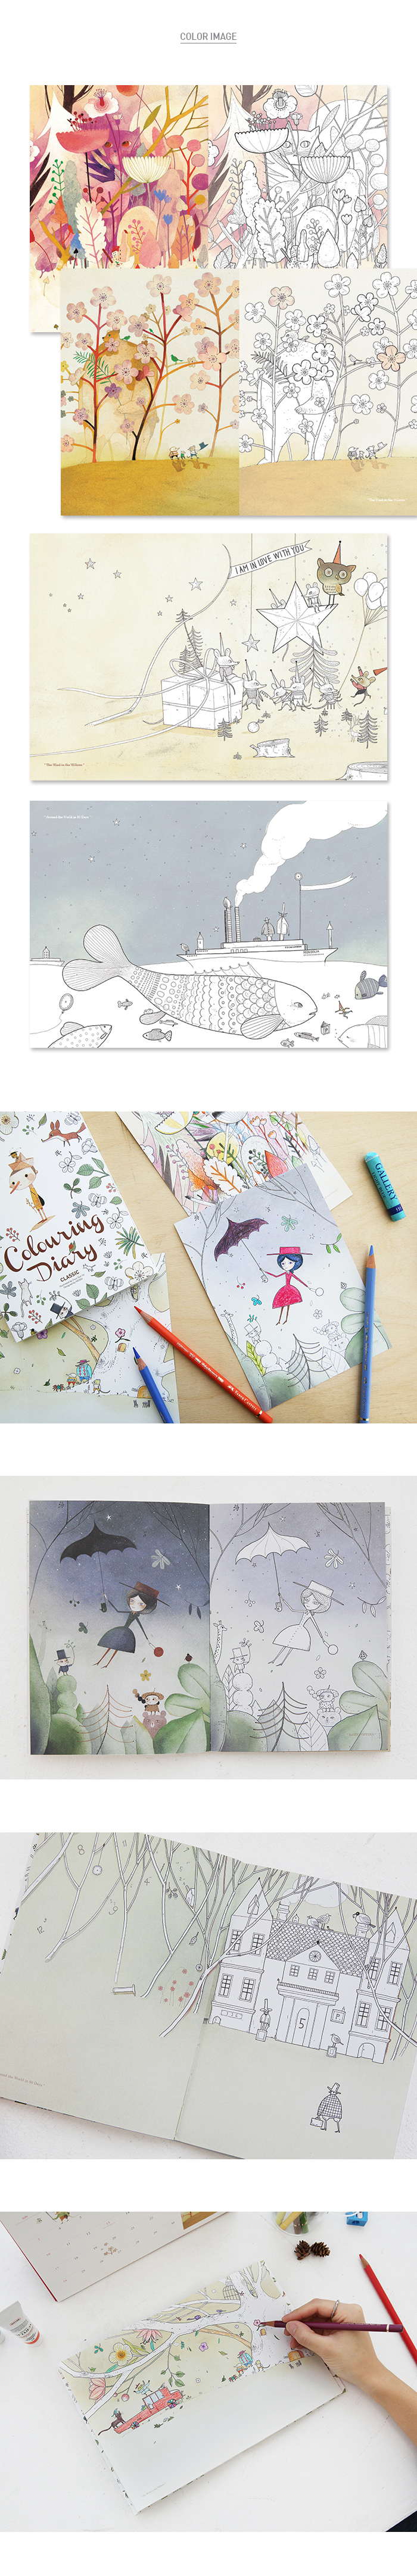 colouring in diary [colouring in diary, decorate diary, colour in diary]